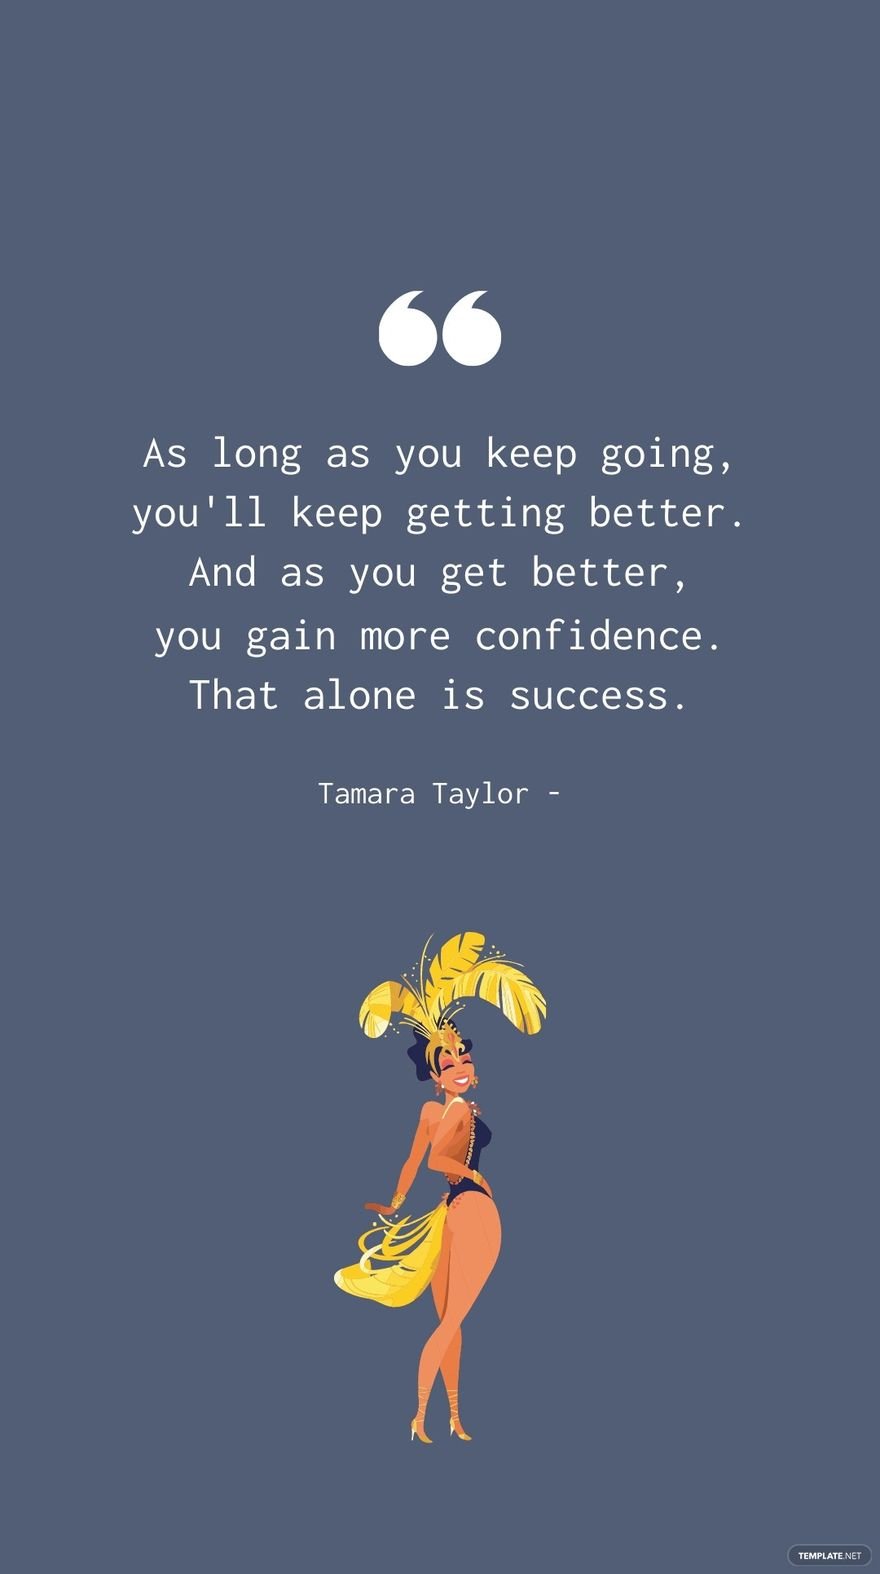 Tamara Taylor - As long as you keep going, you'll keep getting better. And as you get better, you gain more confidence. That alone is success.